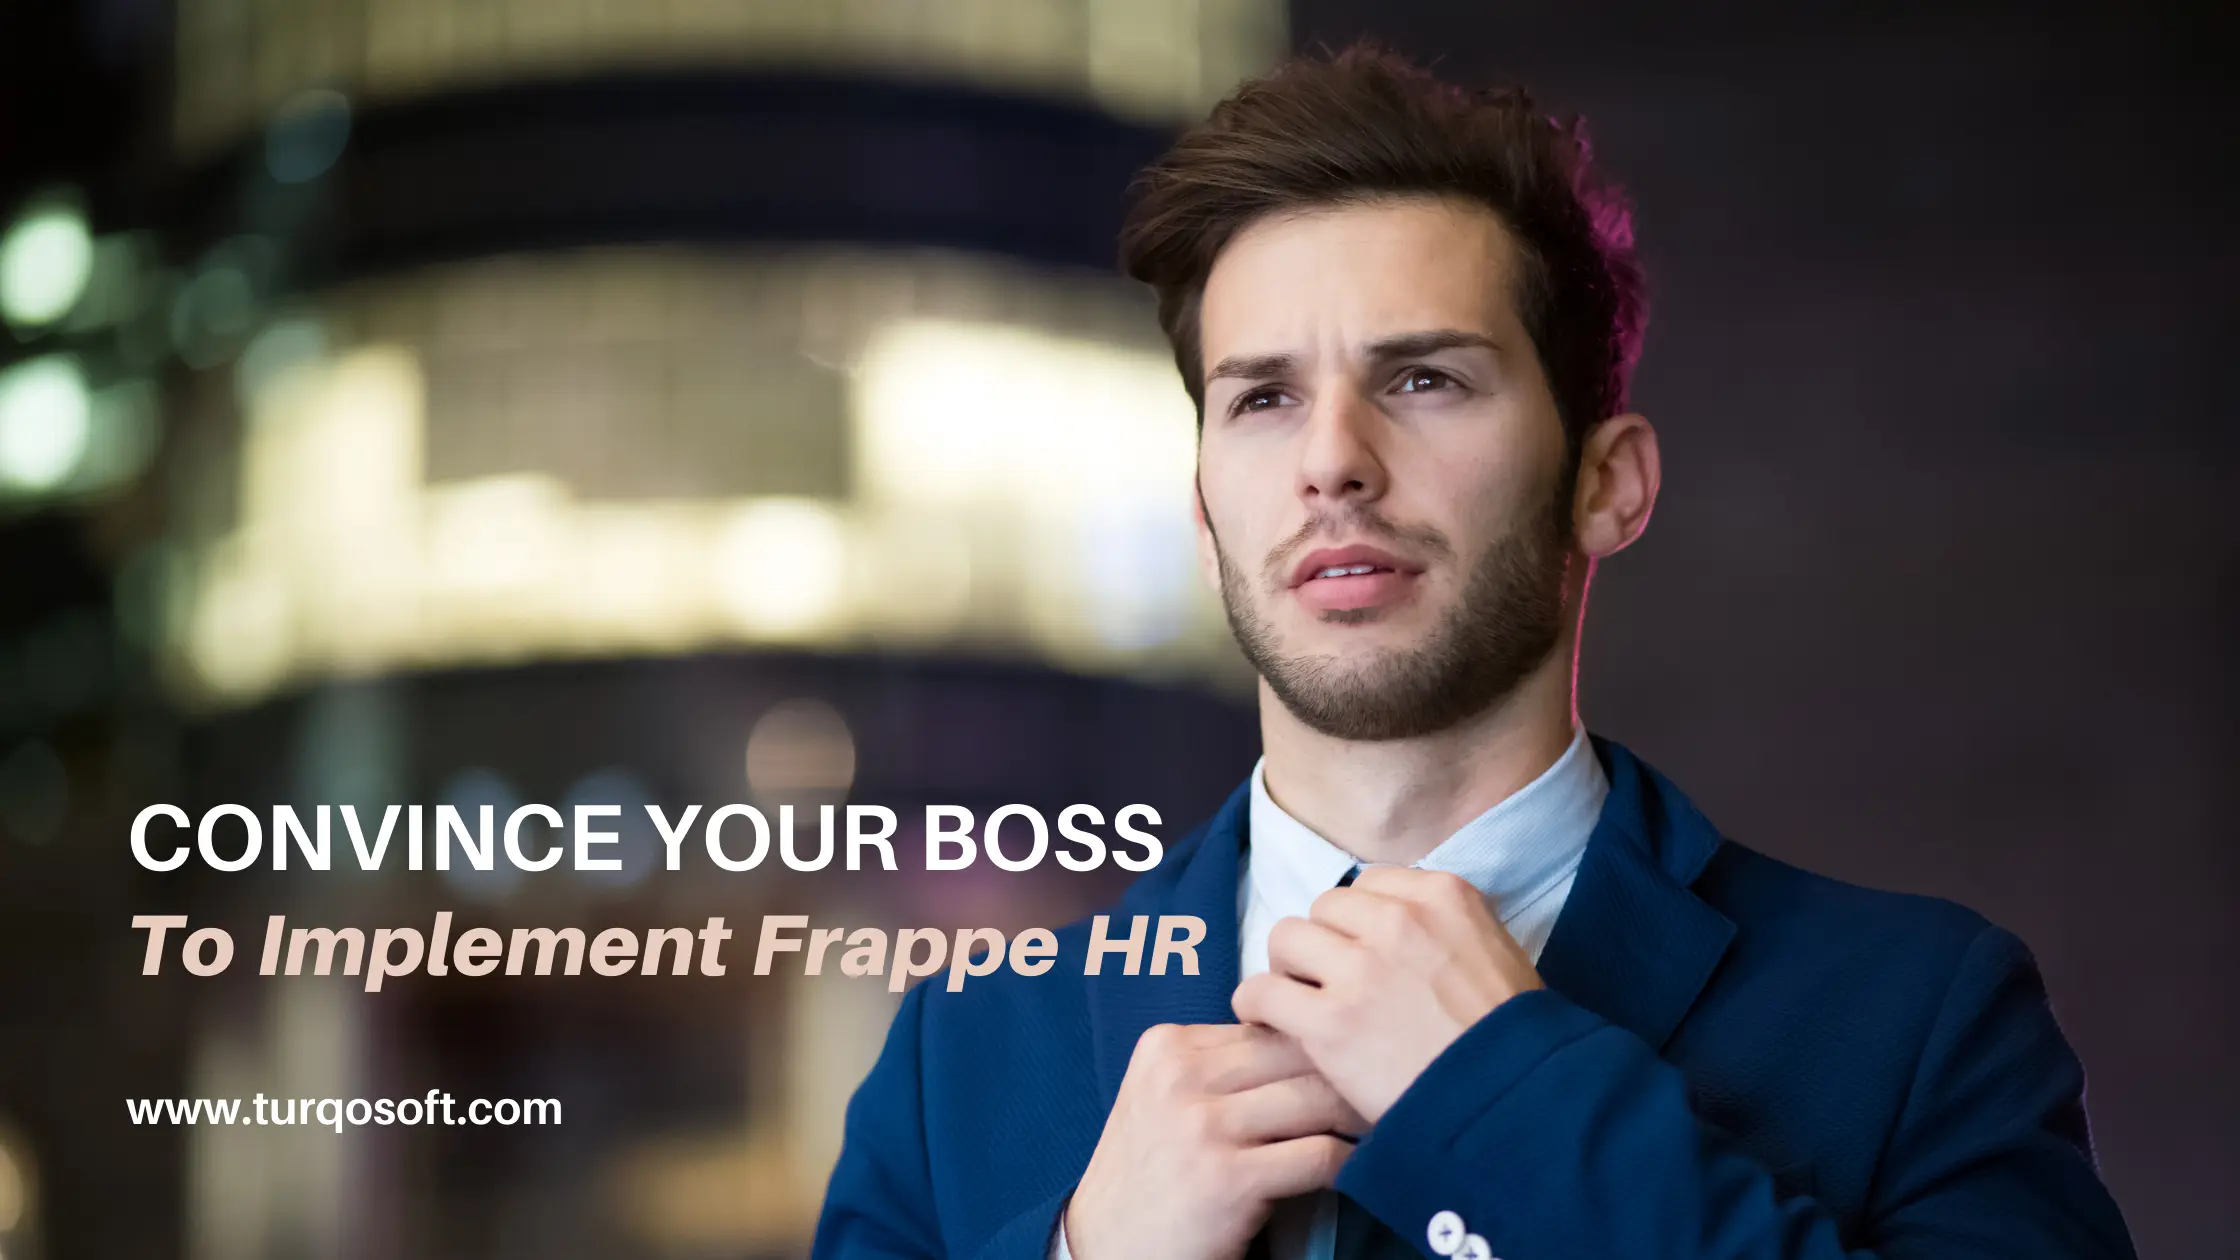 Convince Your Boss To Implement Frappe HR